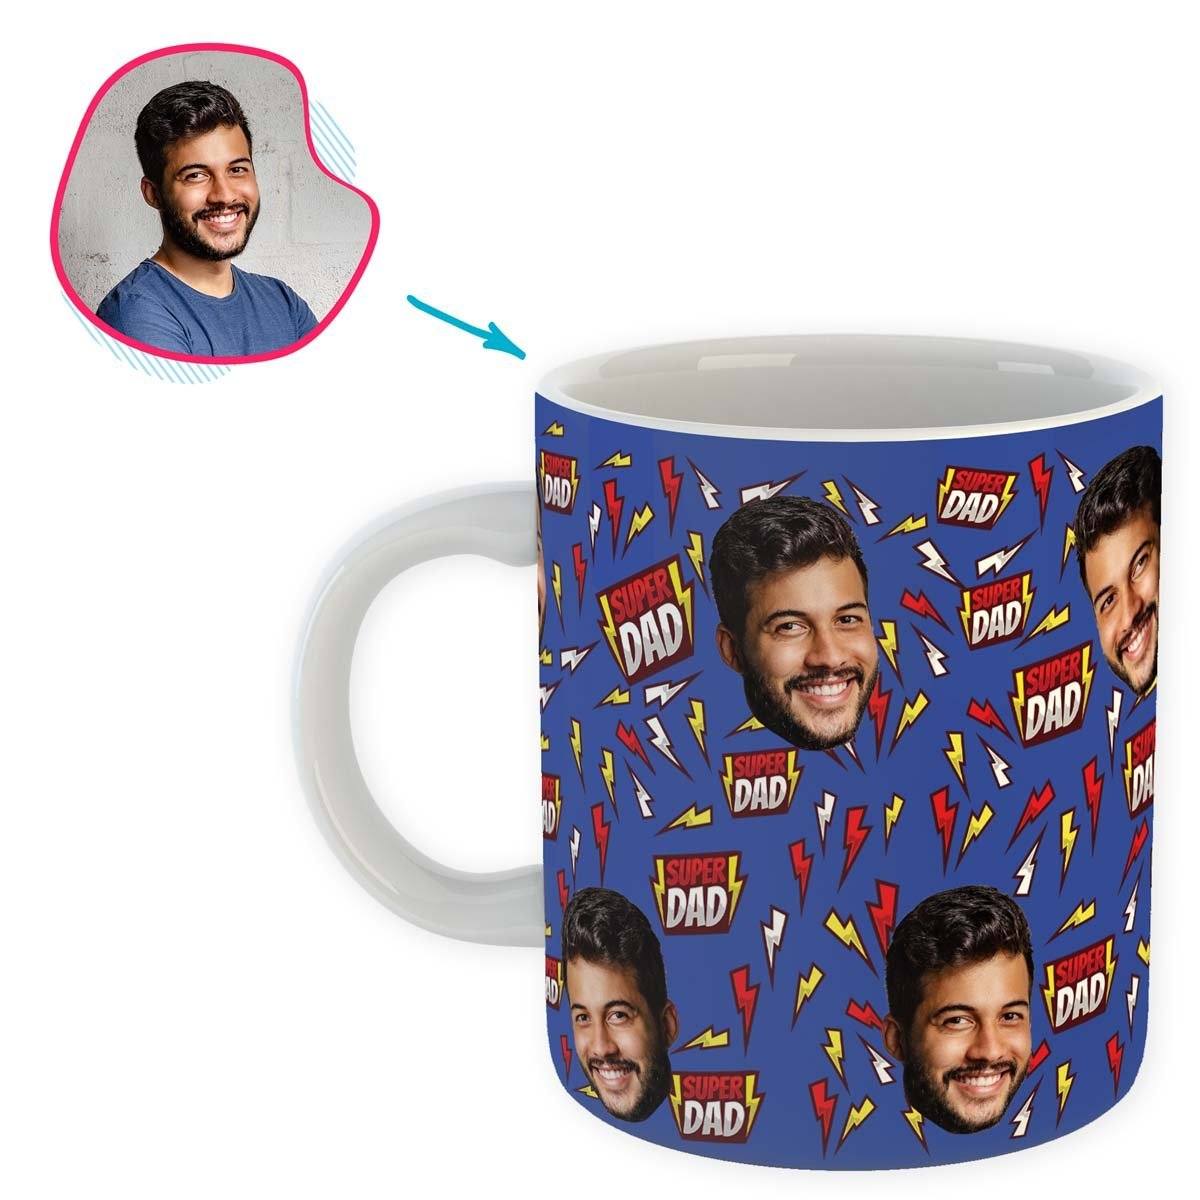 darkblue Super Dad mug personalized with photo of face printed on it